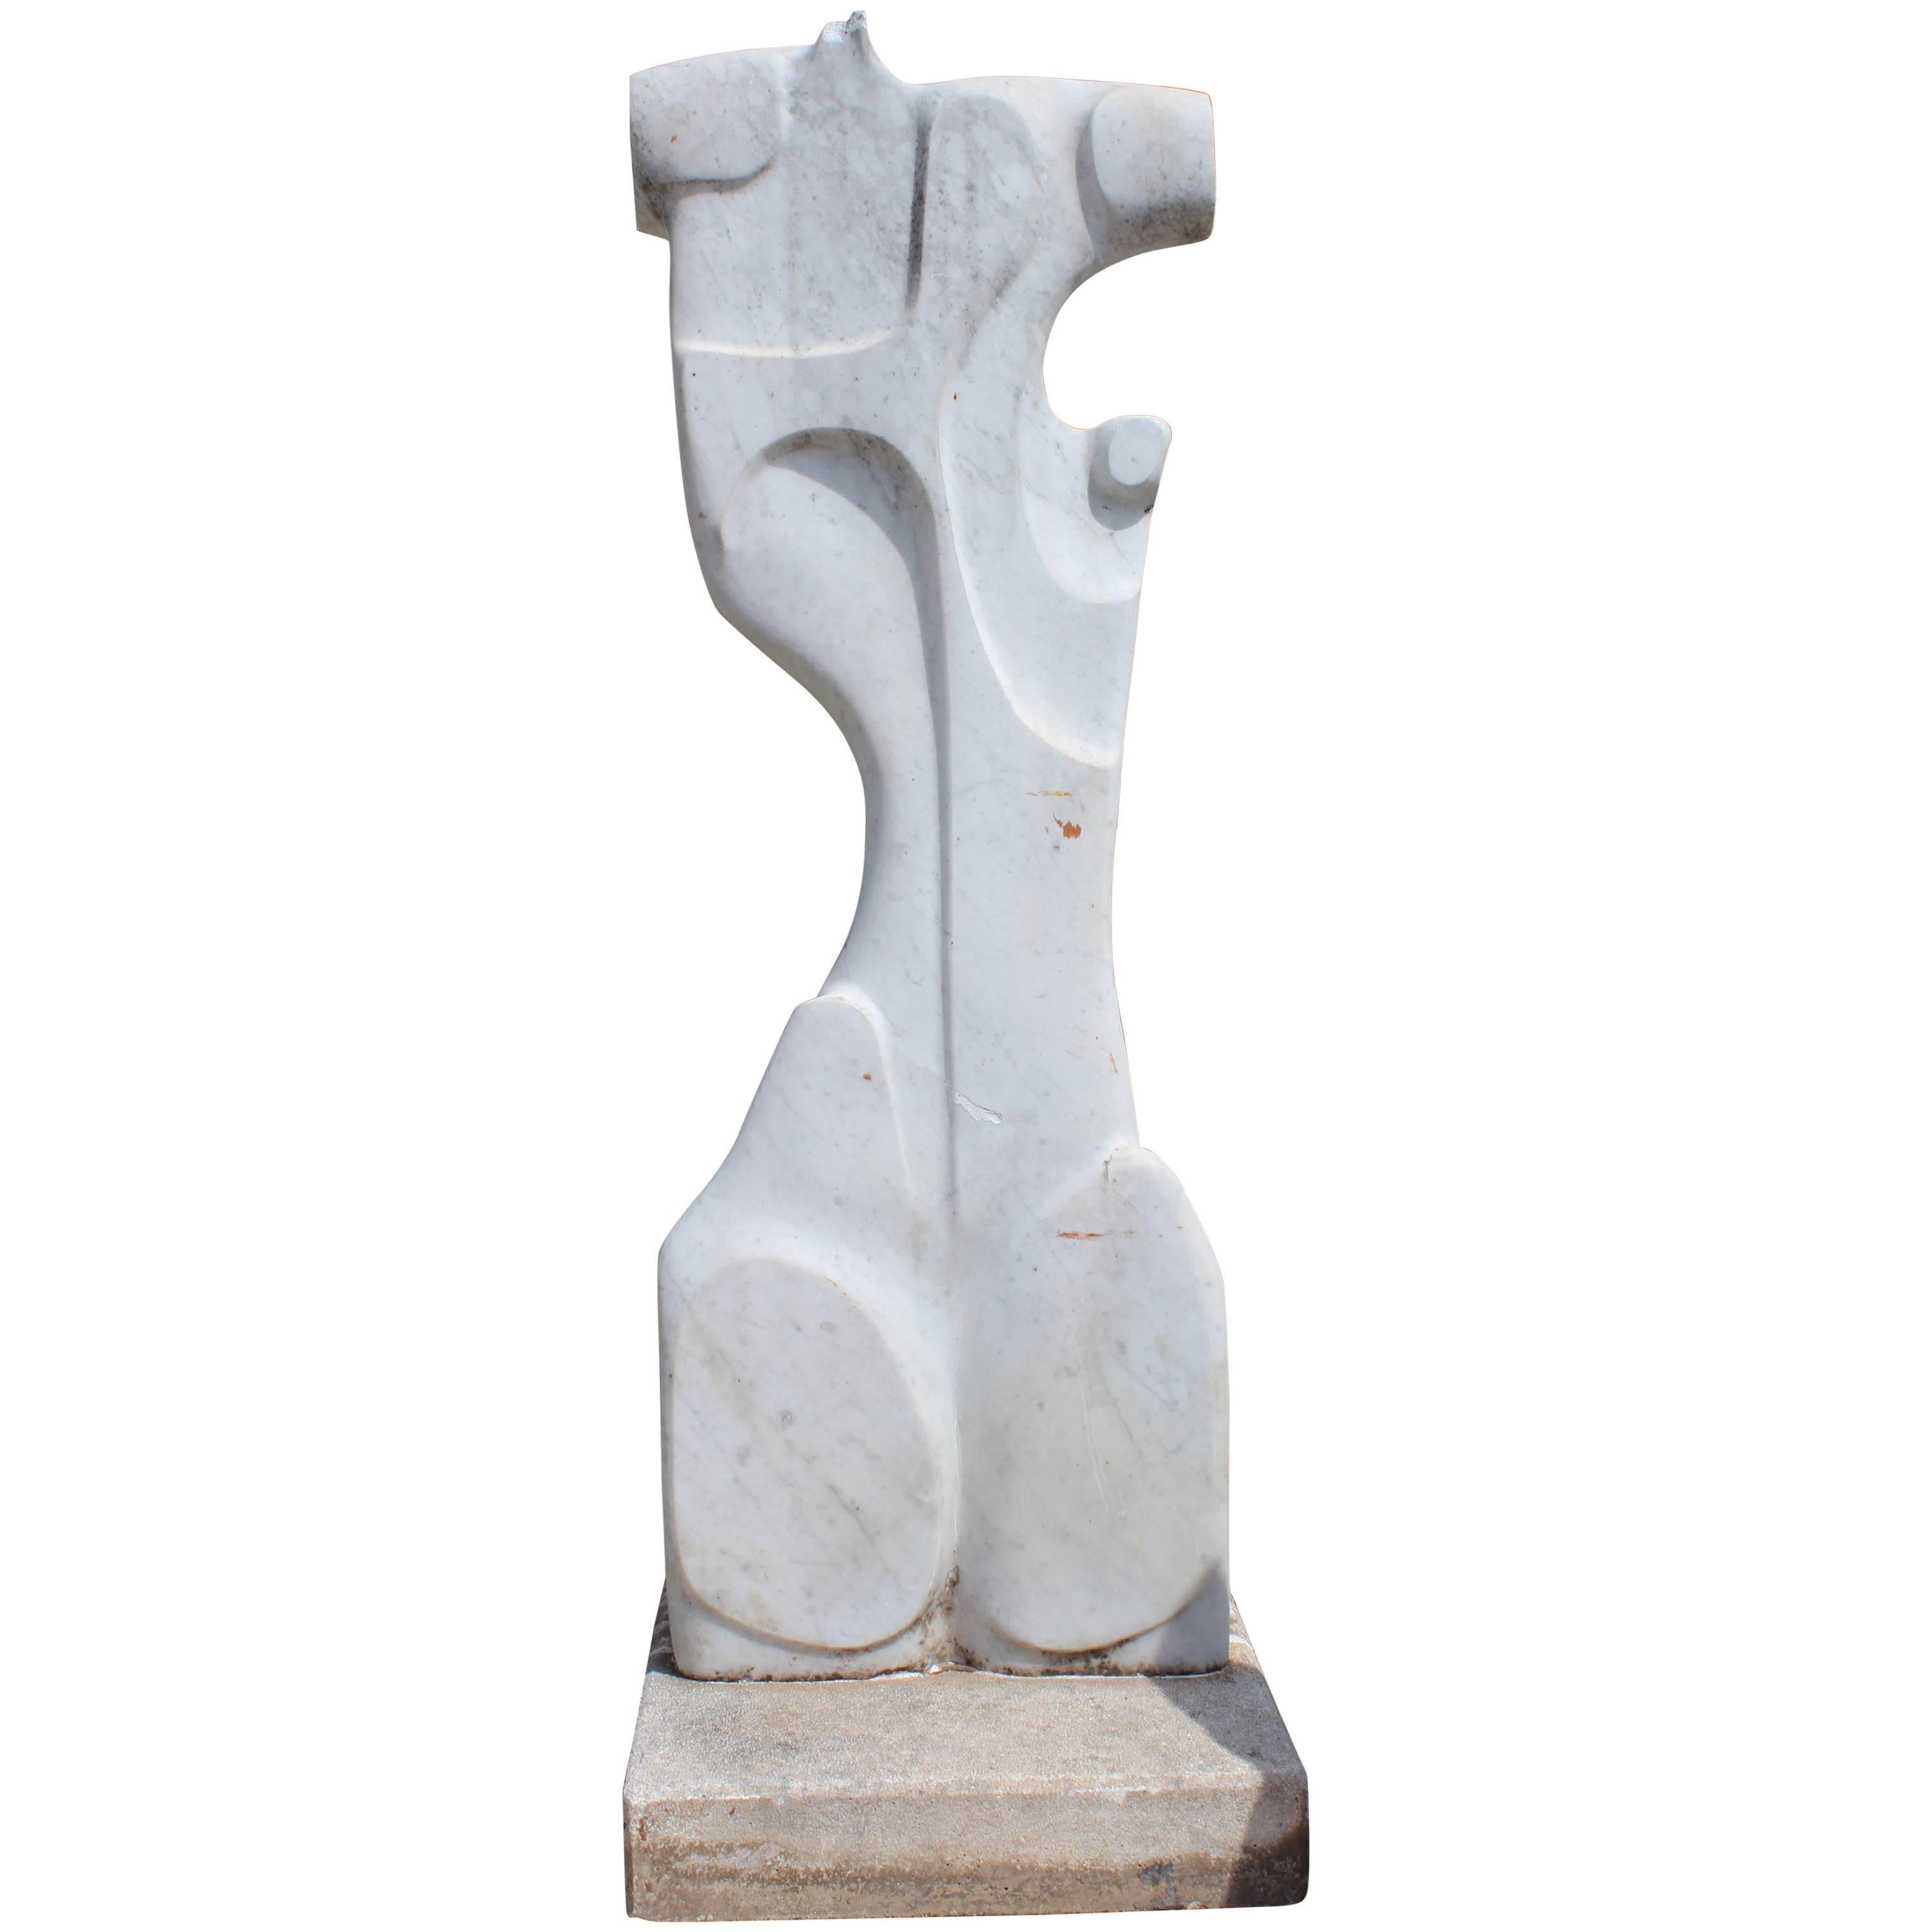 1980s Hand-Carved Modernist Sculpture in White Carrara Marble